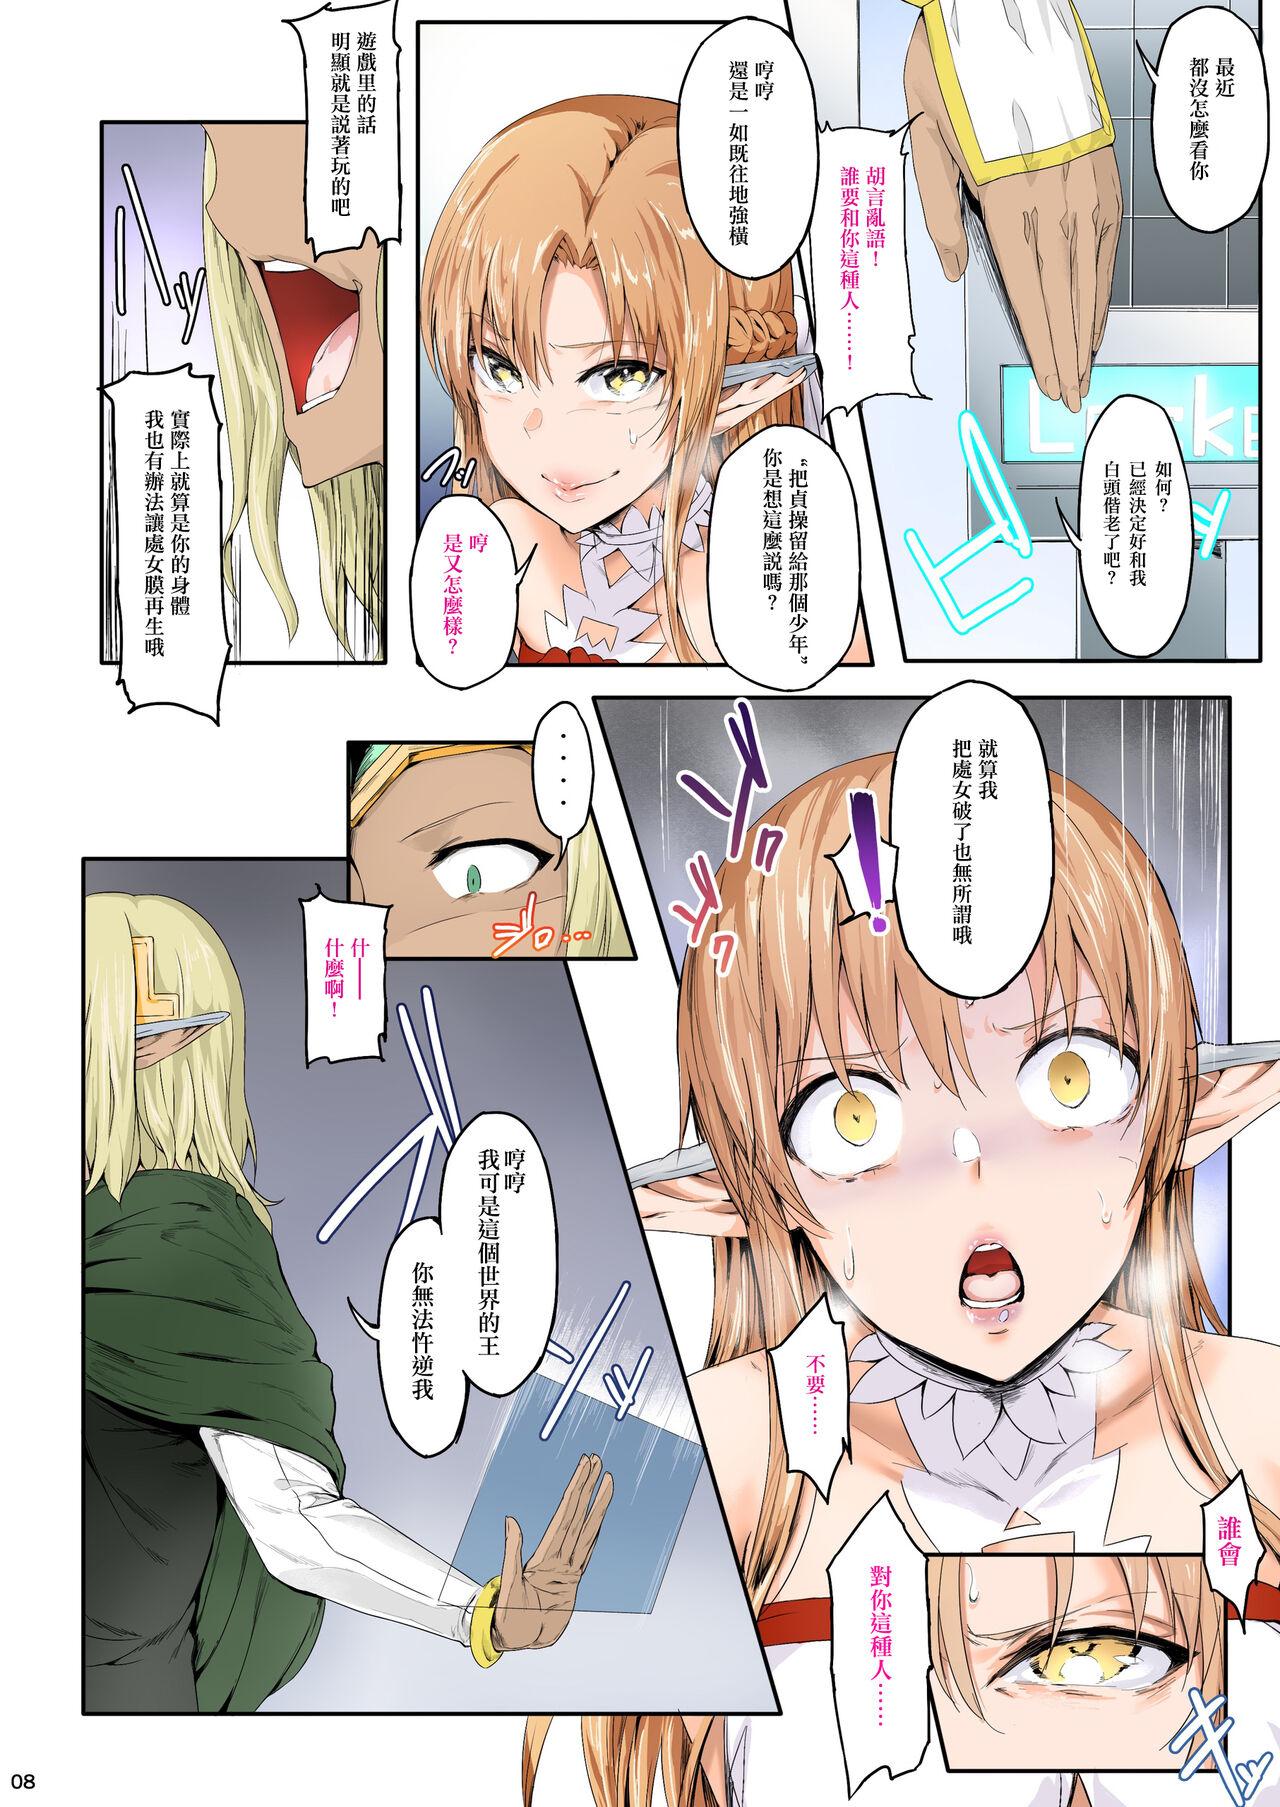 Pussyeating Asunama - Sword art online Car - Page 8